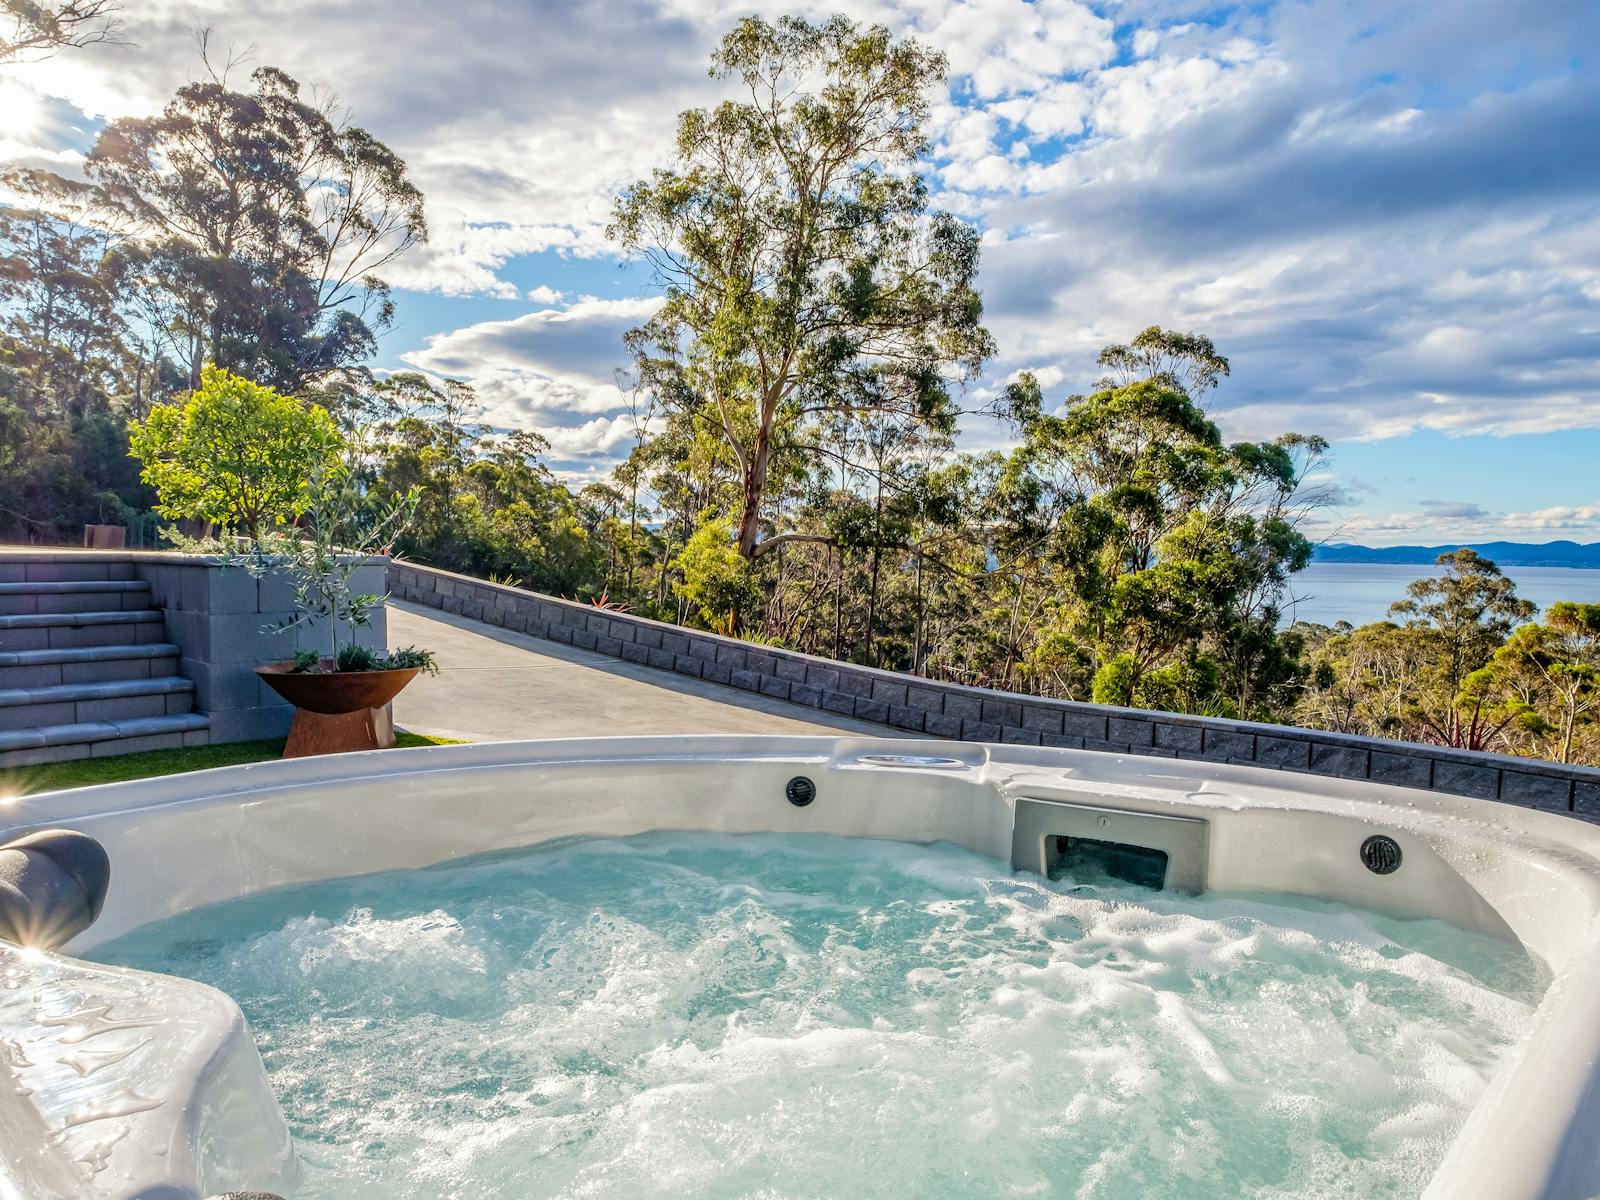 Sink into the hot tub overlooking the water